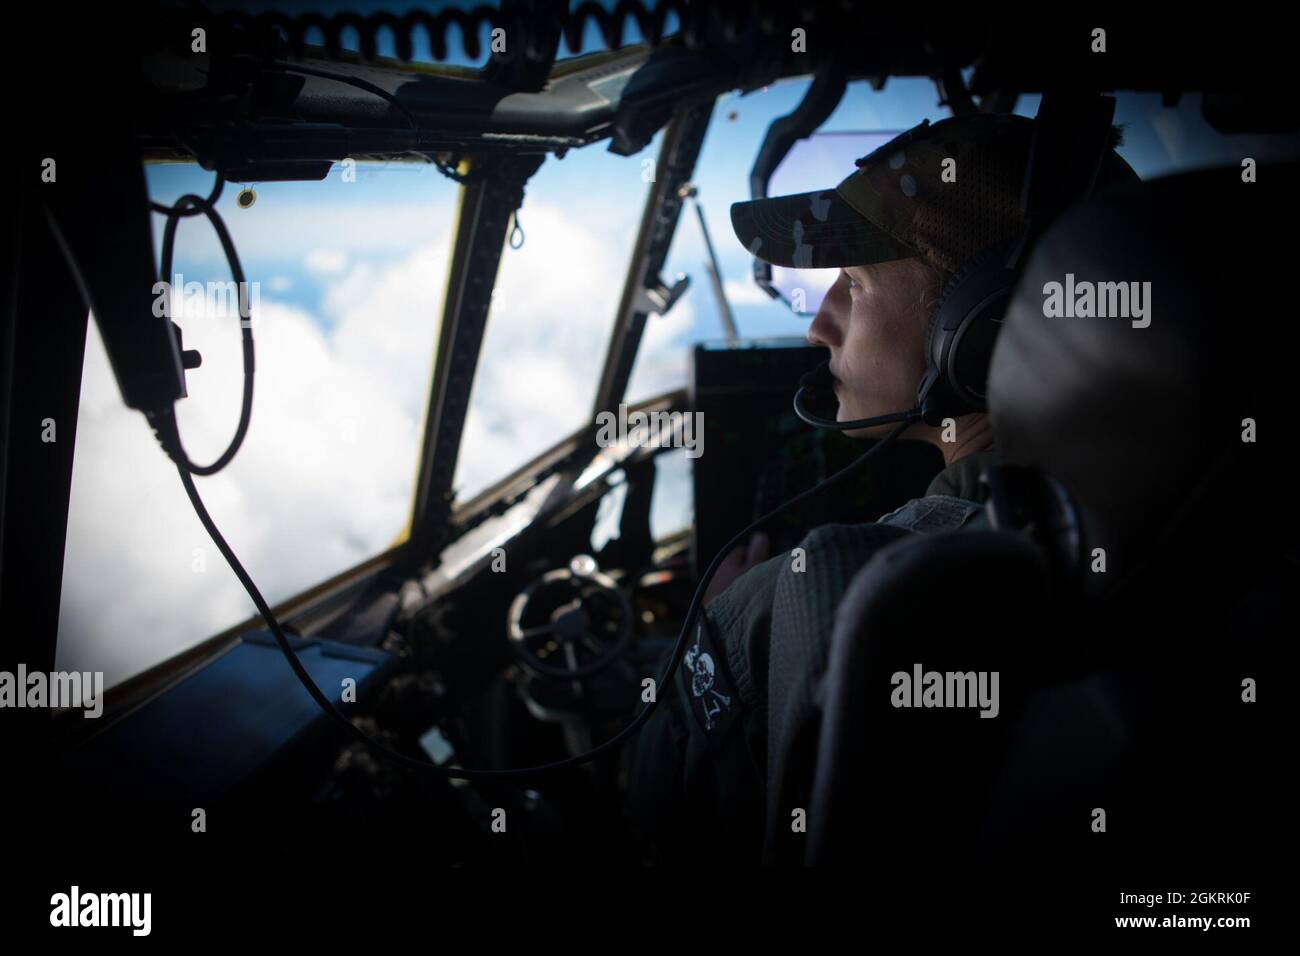 210621-M-WI555-0109 PACIFIC OCEAN (June 21, 2021) Maj. Catherine Burns, a KC-130J Hercules pilot with Marine Aerial Refueler Transport Squadron (VMGR) 352, Marine Aircraft Group (MAG) 11, 3rd Marine Aircraft Wing (MAW), I Marine Expeditionary Force (MEF), observes the Pacific Ocean, June 21. VMGR-352 is currently conducting routine operations in U.S. 3rd Fleet. Stock Photo